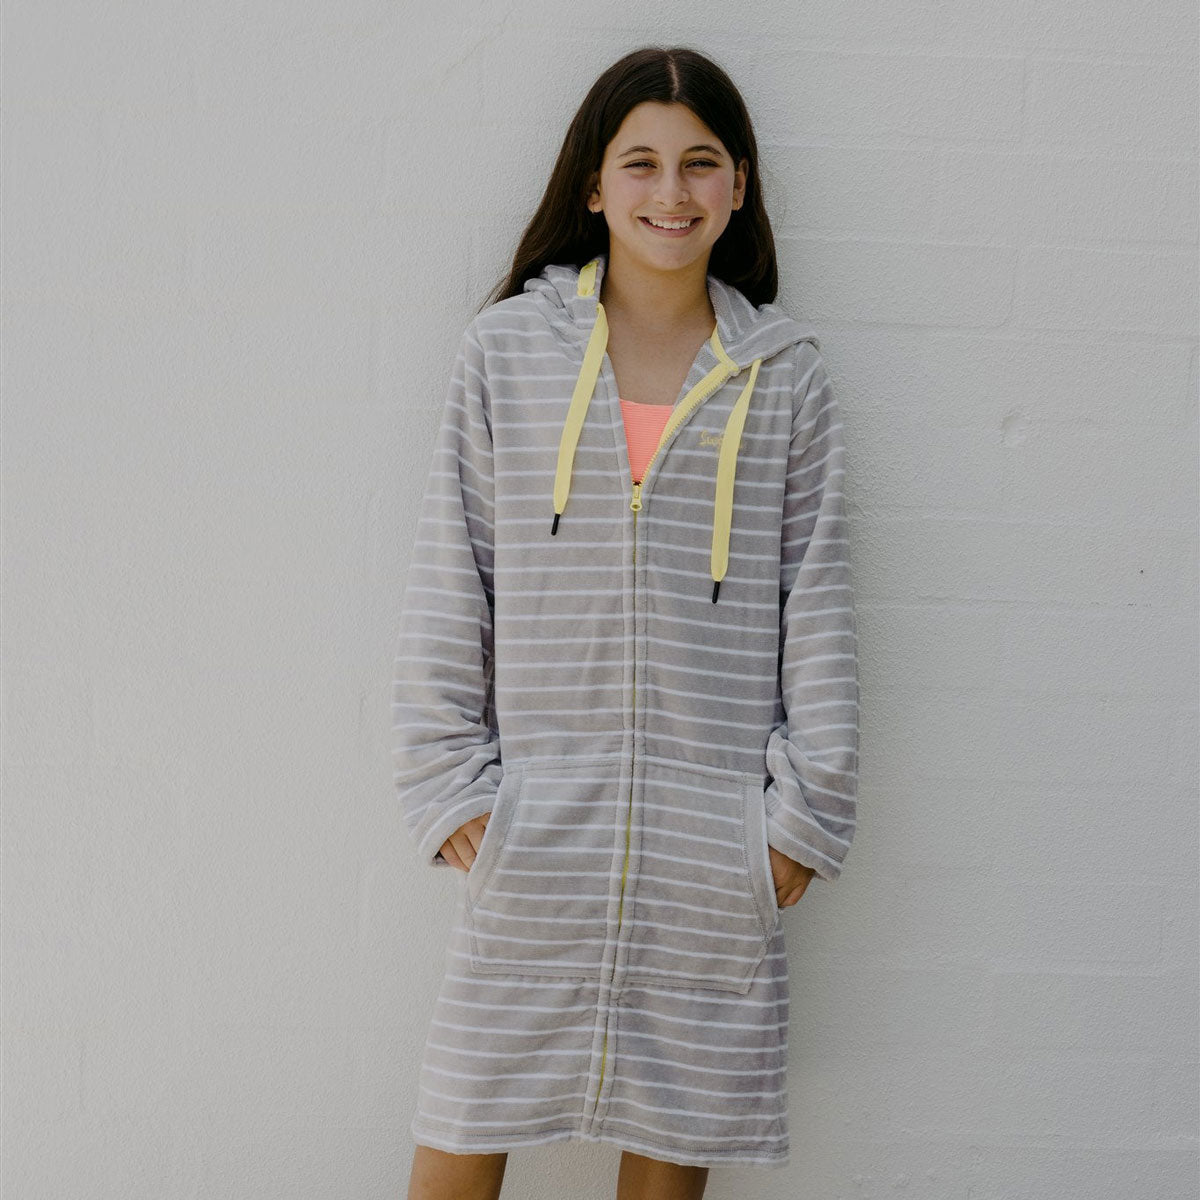 Girl wearing grey with lemon swimming robe standing front on